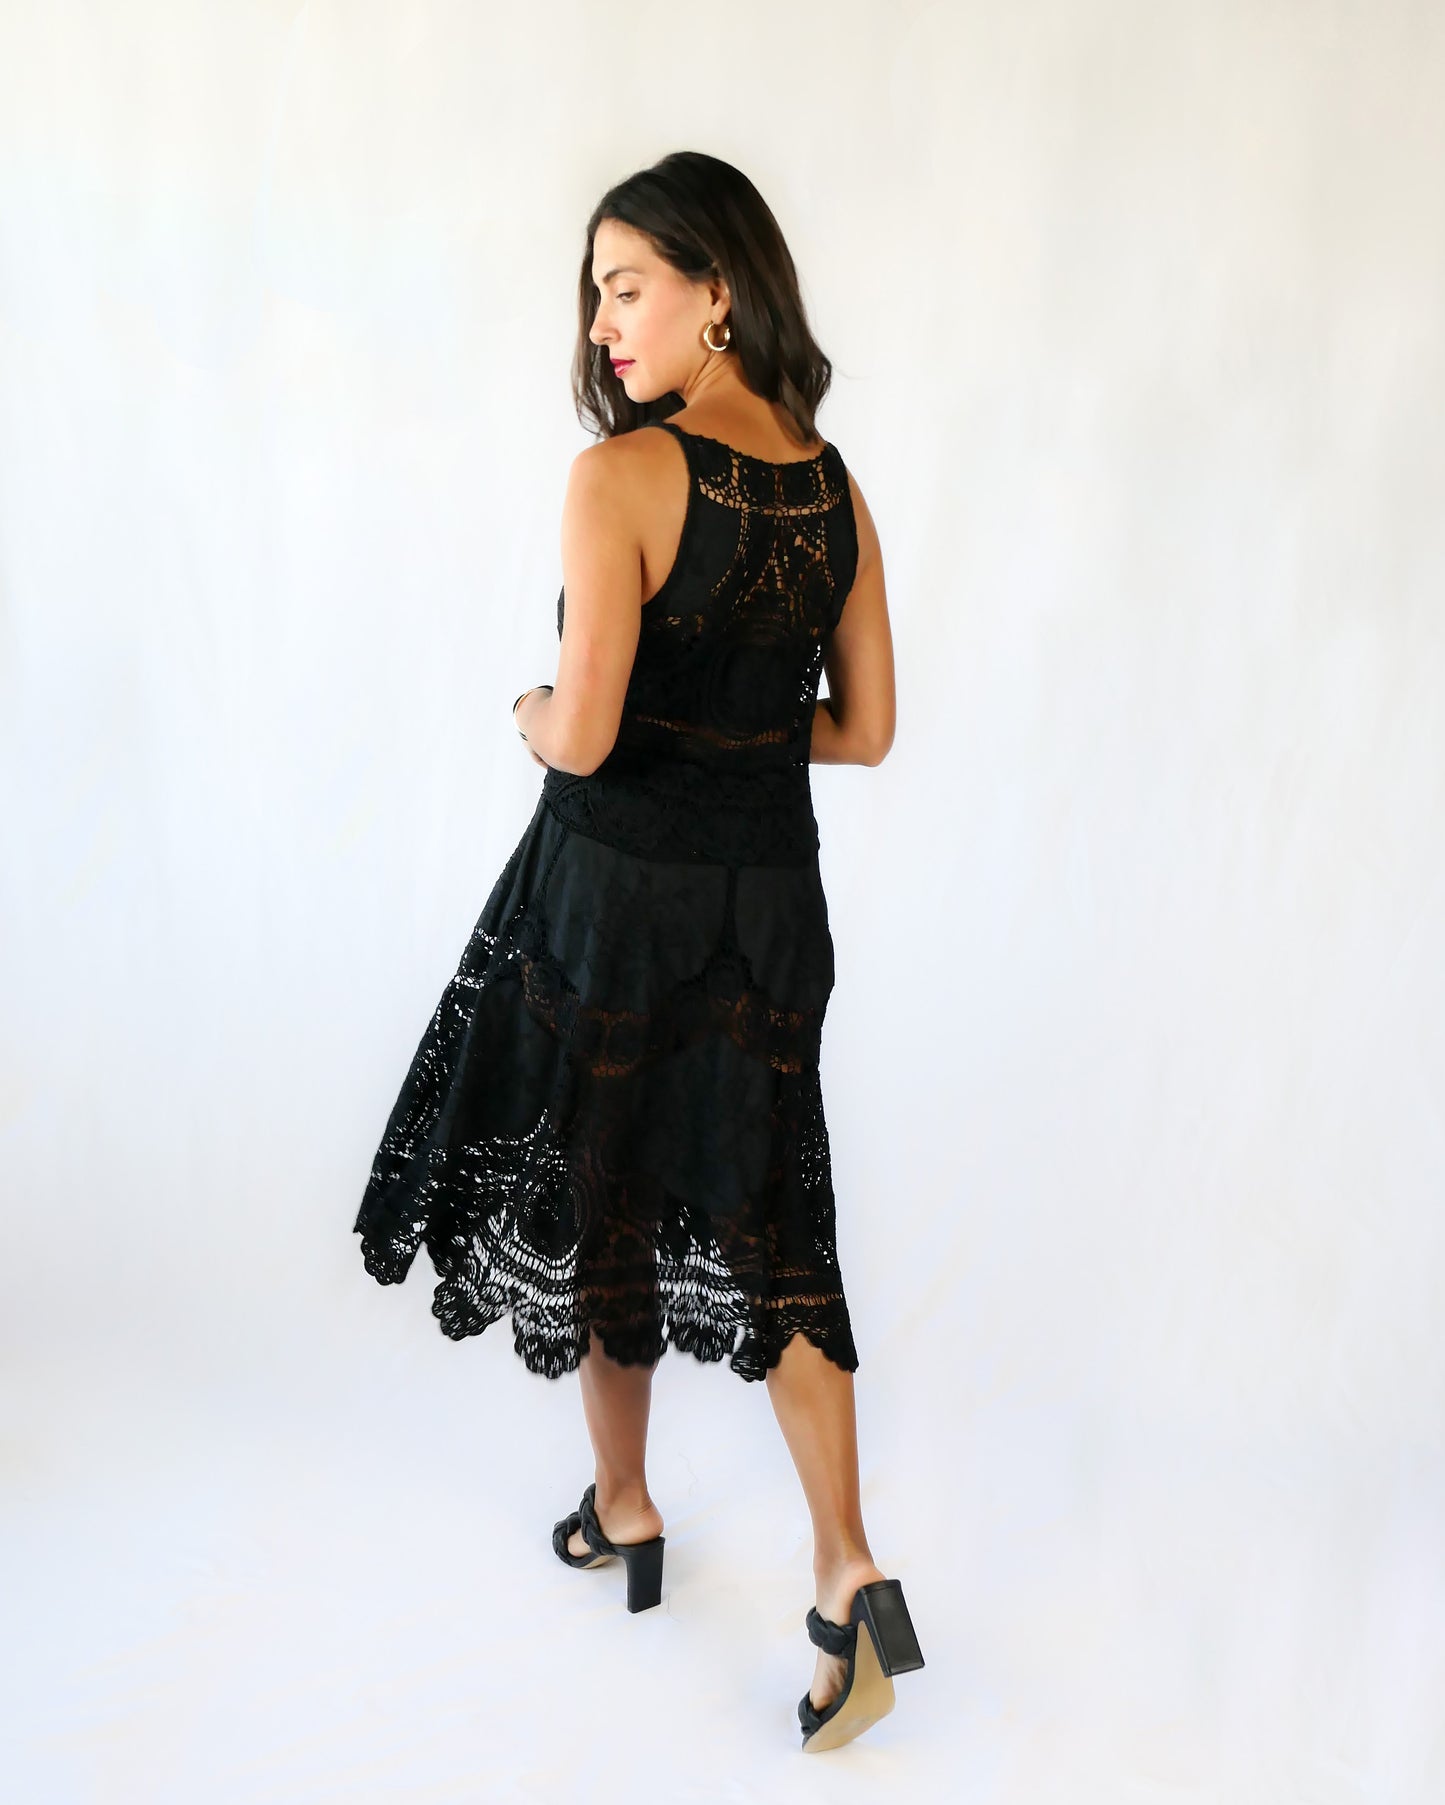 This Little Black Dress with detailed hand crochet and embroidery work lends itself a vintage flair.  The dress can be buttoned up the front or back, has a flattering fit at the waist, and flares out towards the hem.  Wear it as a cocktail dress with black heels or sandals, or as a beach coverup.  